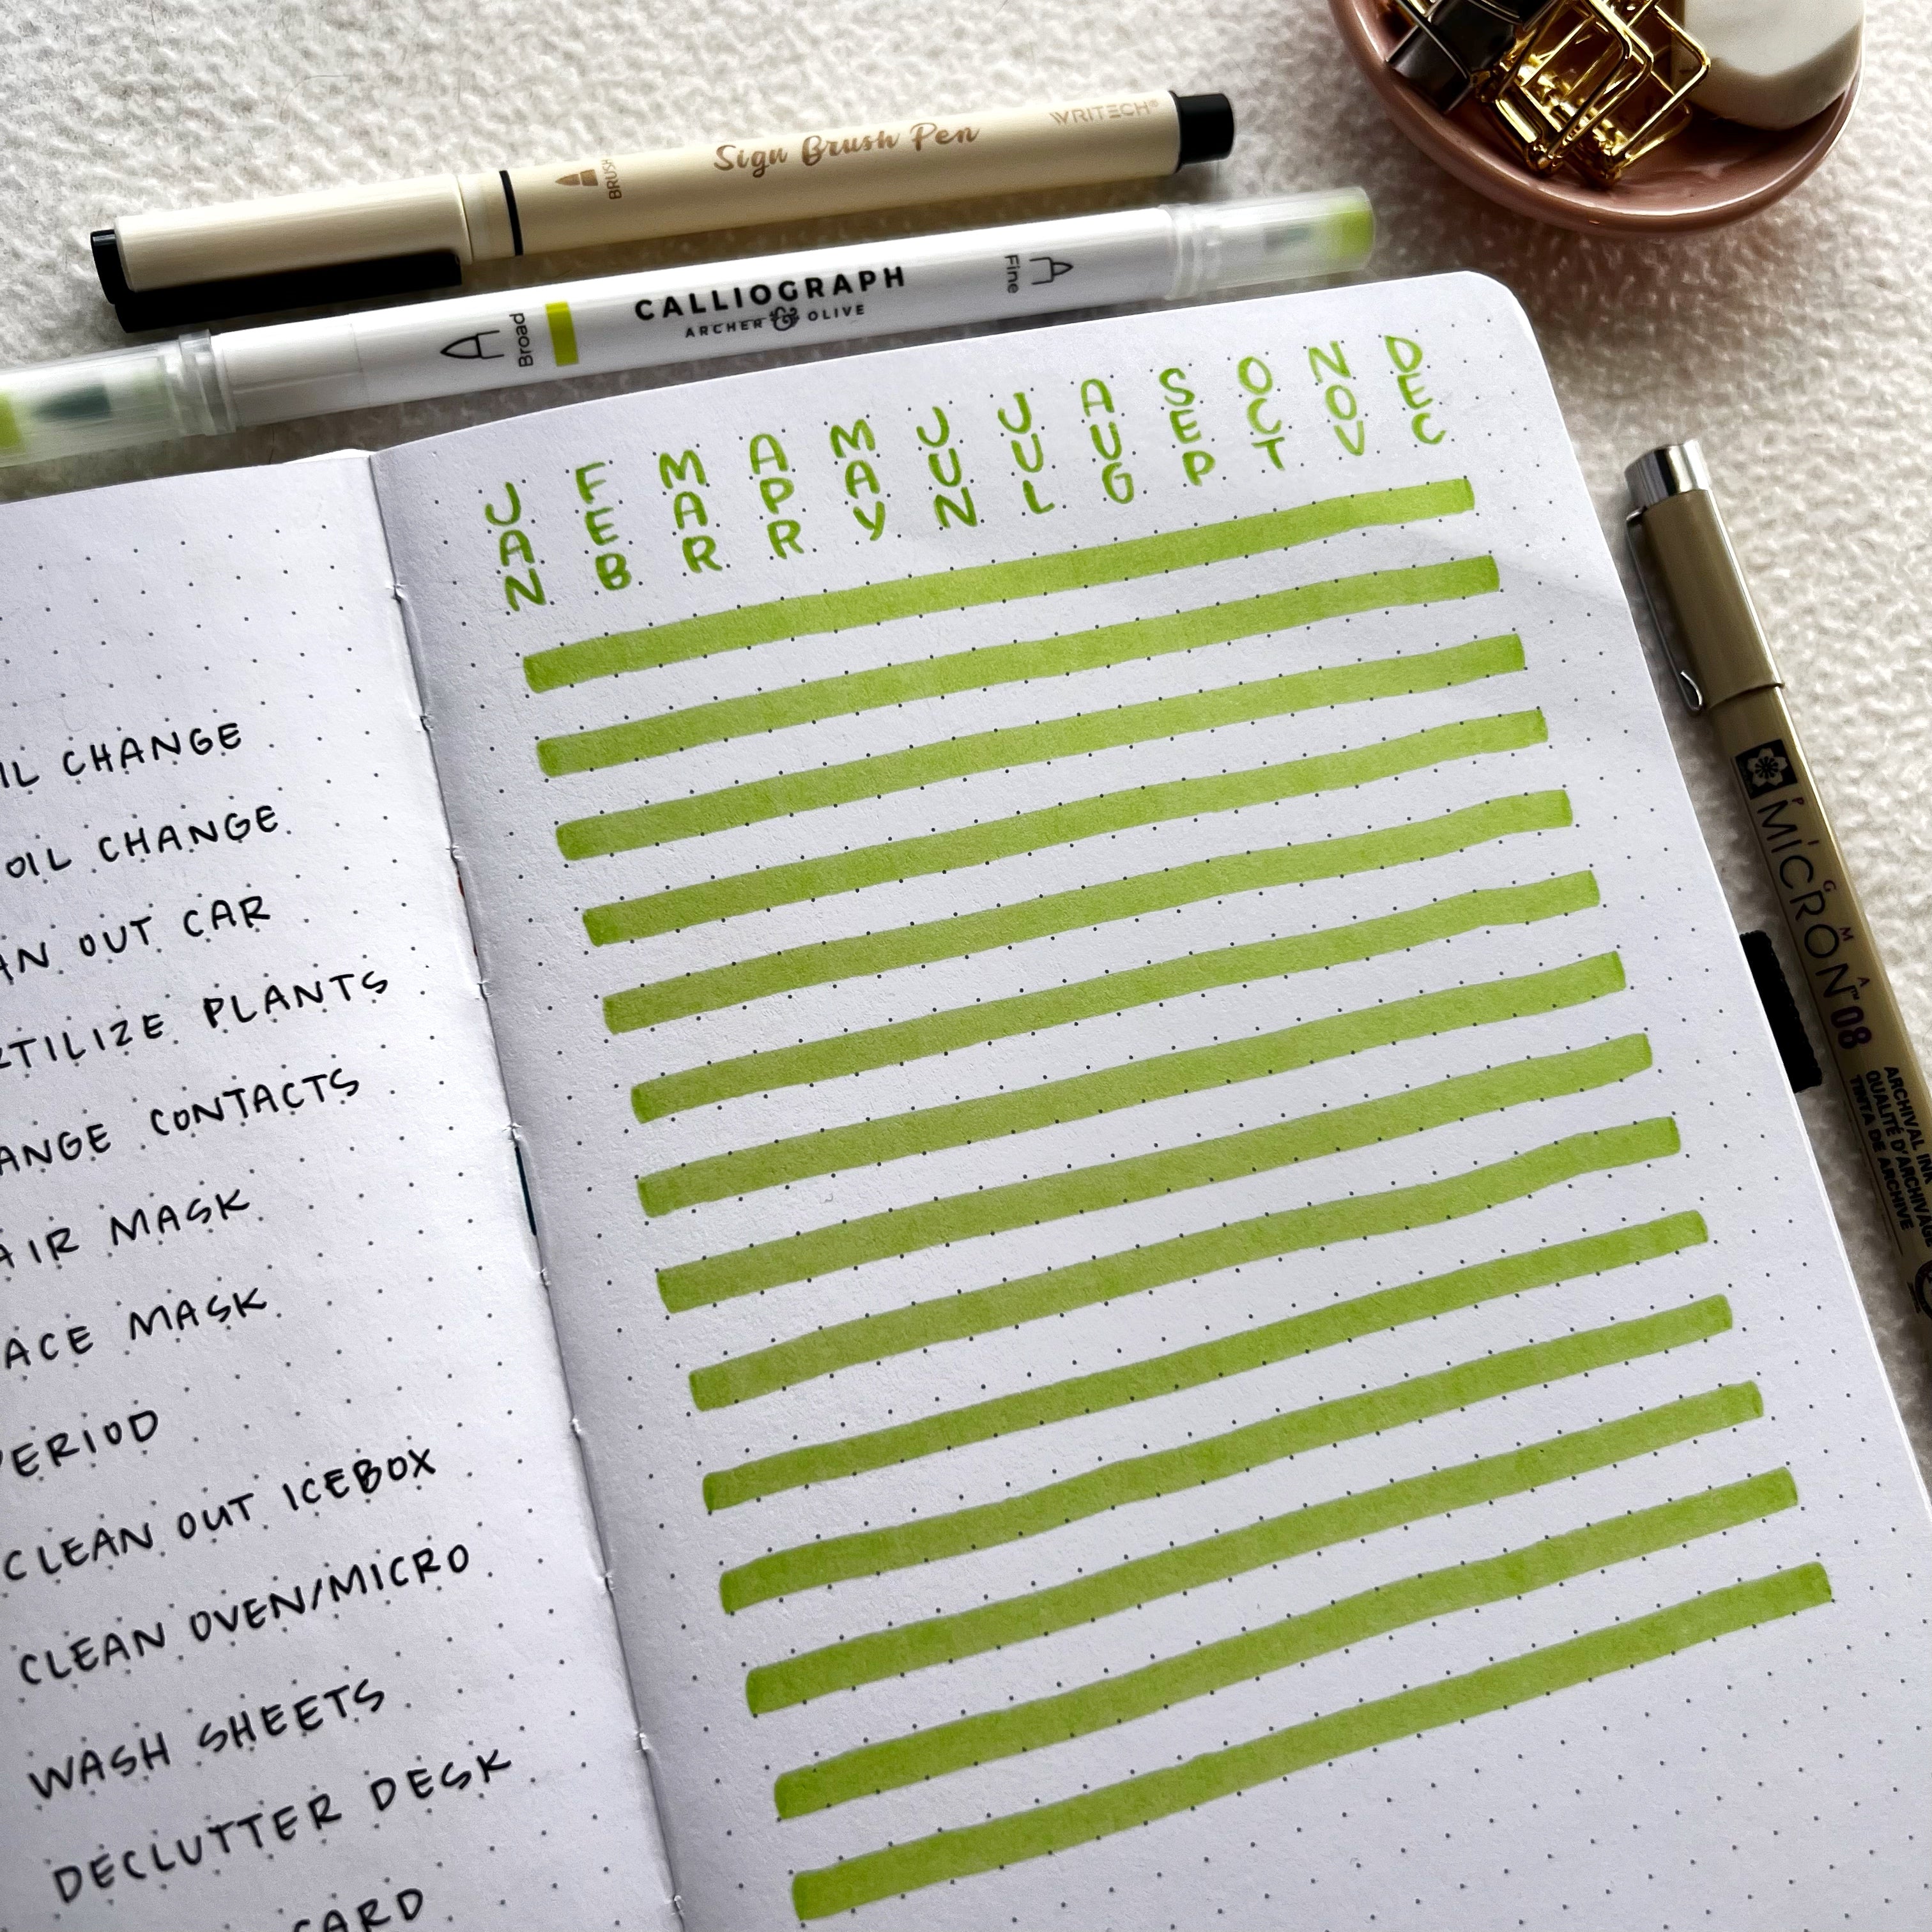 Open notebook with spread displayed. Months of the year written a row across the top of the page. Horizontal stripes of color beneath. Various stationery scattered around.